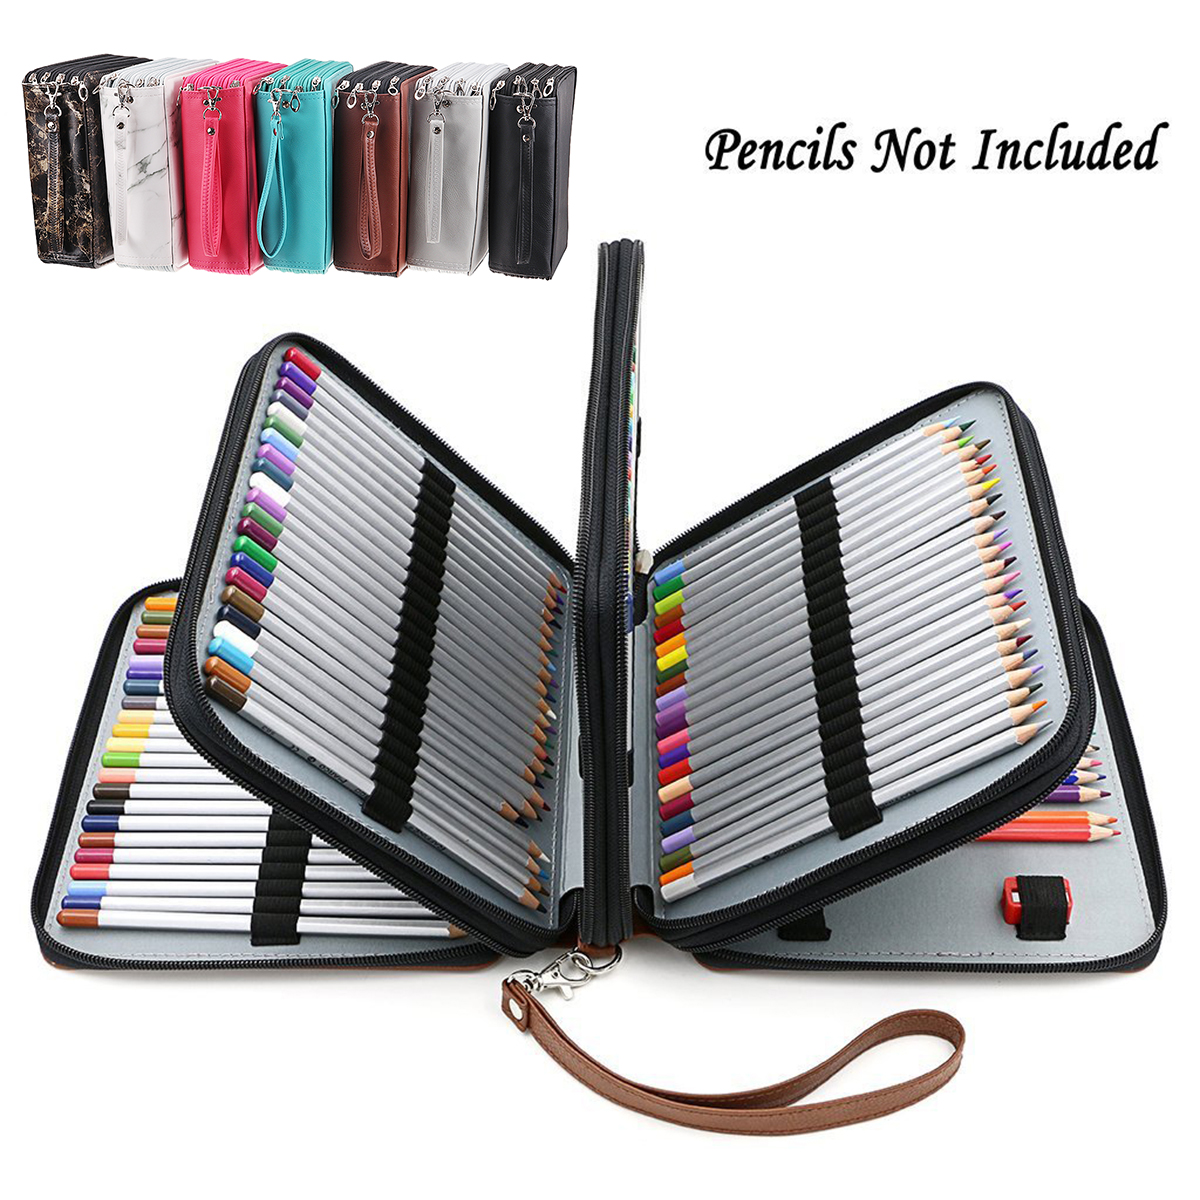 1-Piece-168-Slots-Colored-Pencil-Case-Large-Capacity-Soft-PU-Leather-Pencils-Holder-Organizer-with-C-1635702-5